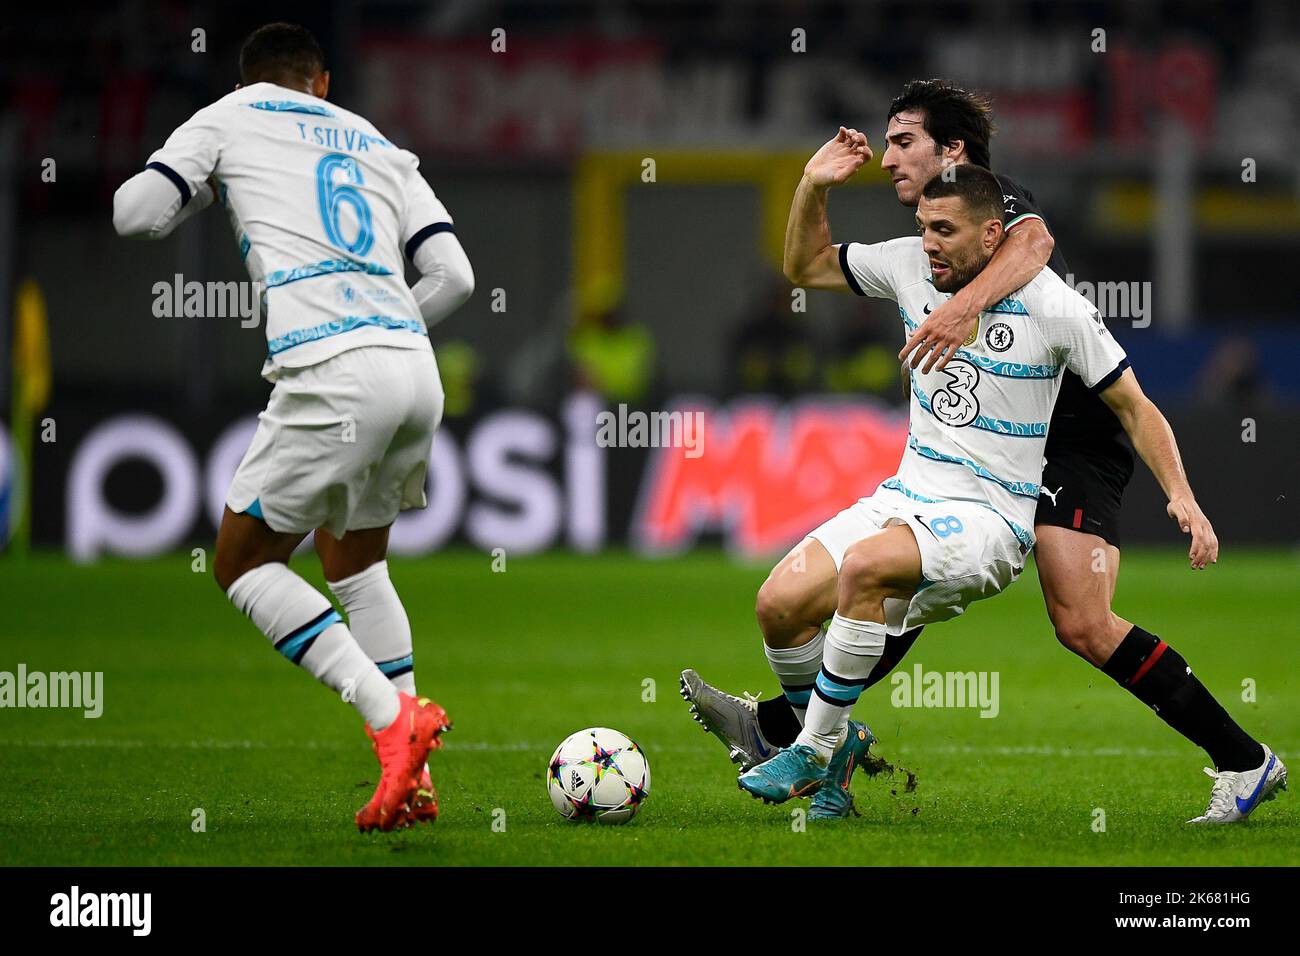 Milan, Italy. 11 October 2022. Mateo Kovacic of Chelsea FC competes for the ball with Sandro Tonali of AC Milan during the UEFA Champions League football match AC Milan and Chelsea FC. Credit: Nicolò Campo/Alamy Live News Stock Photo